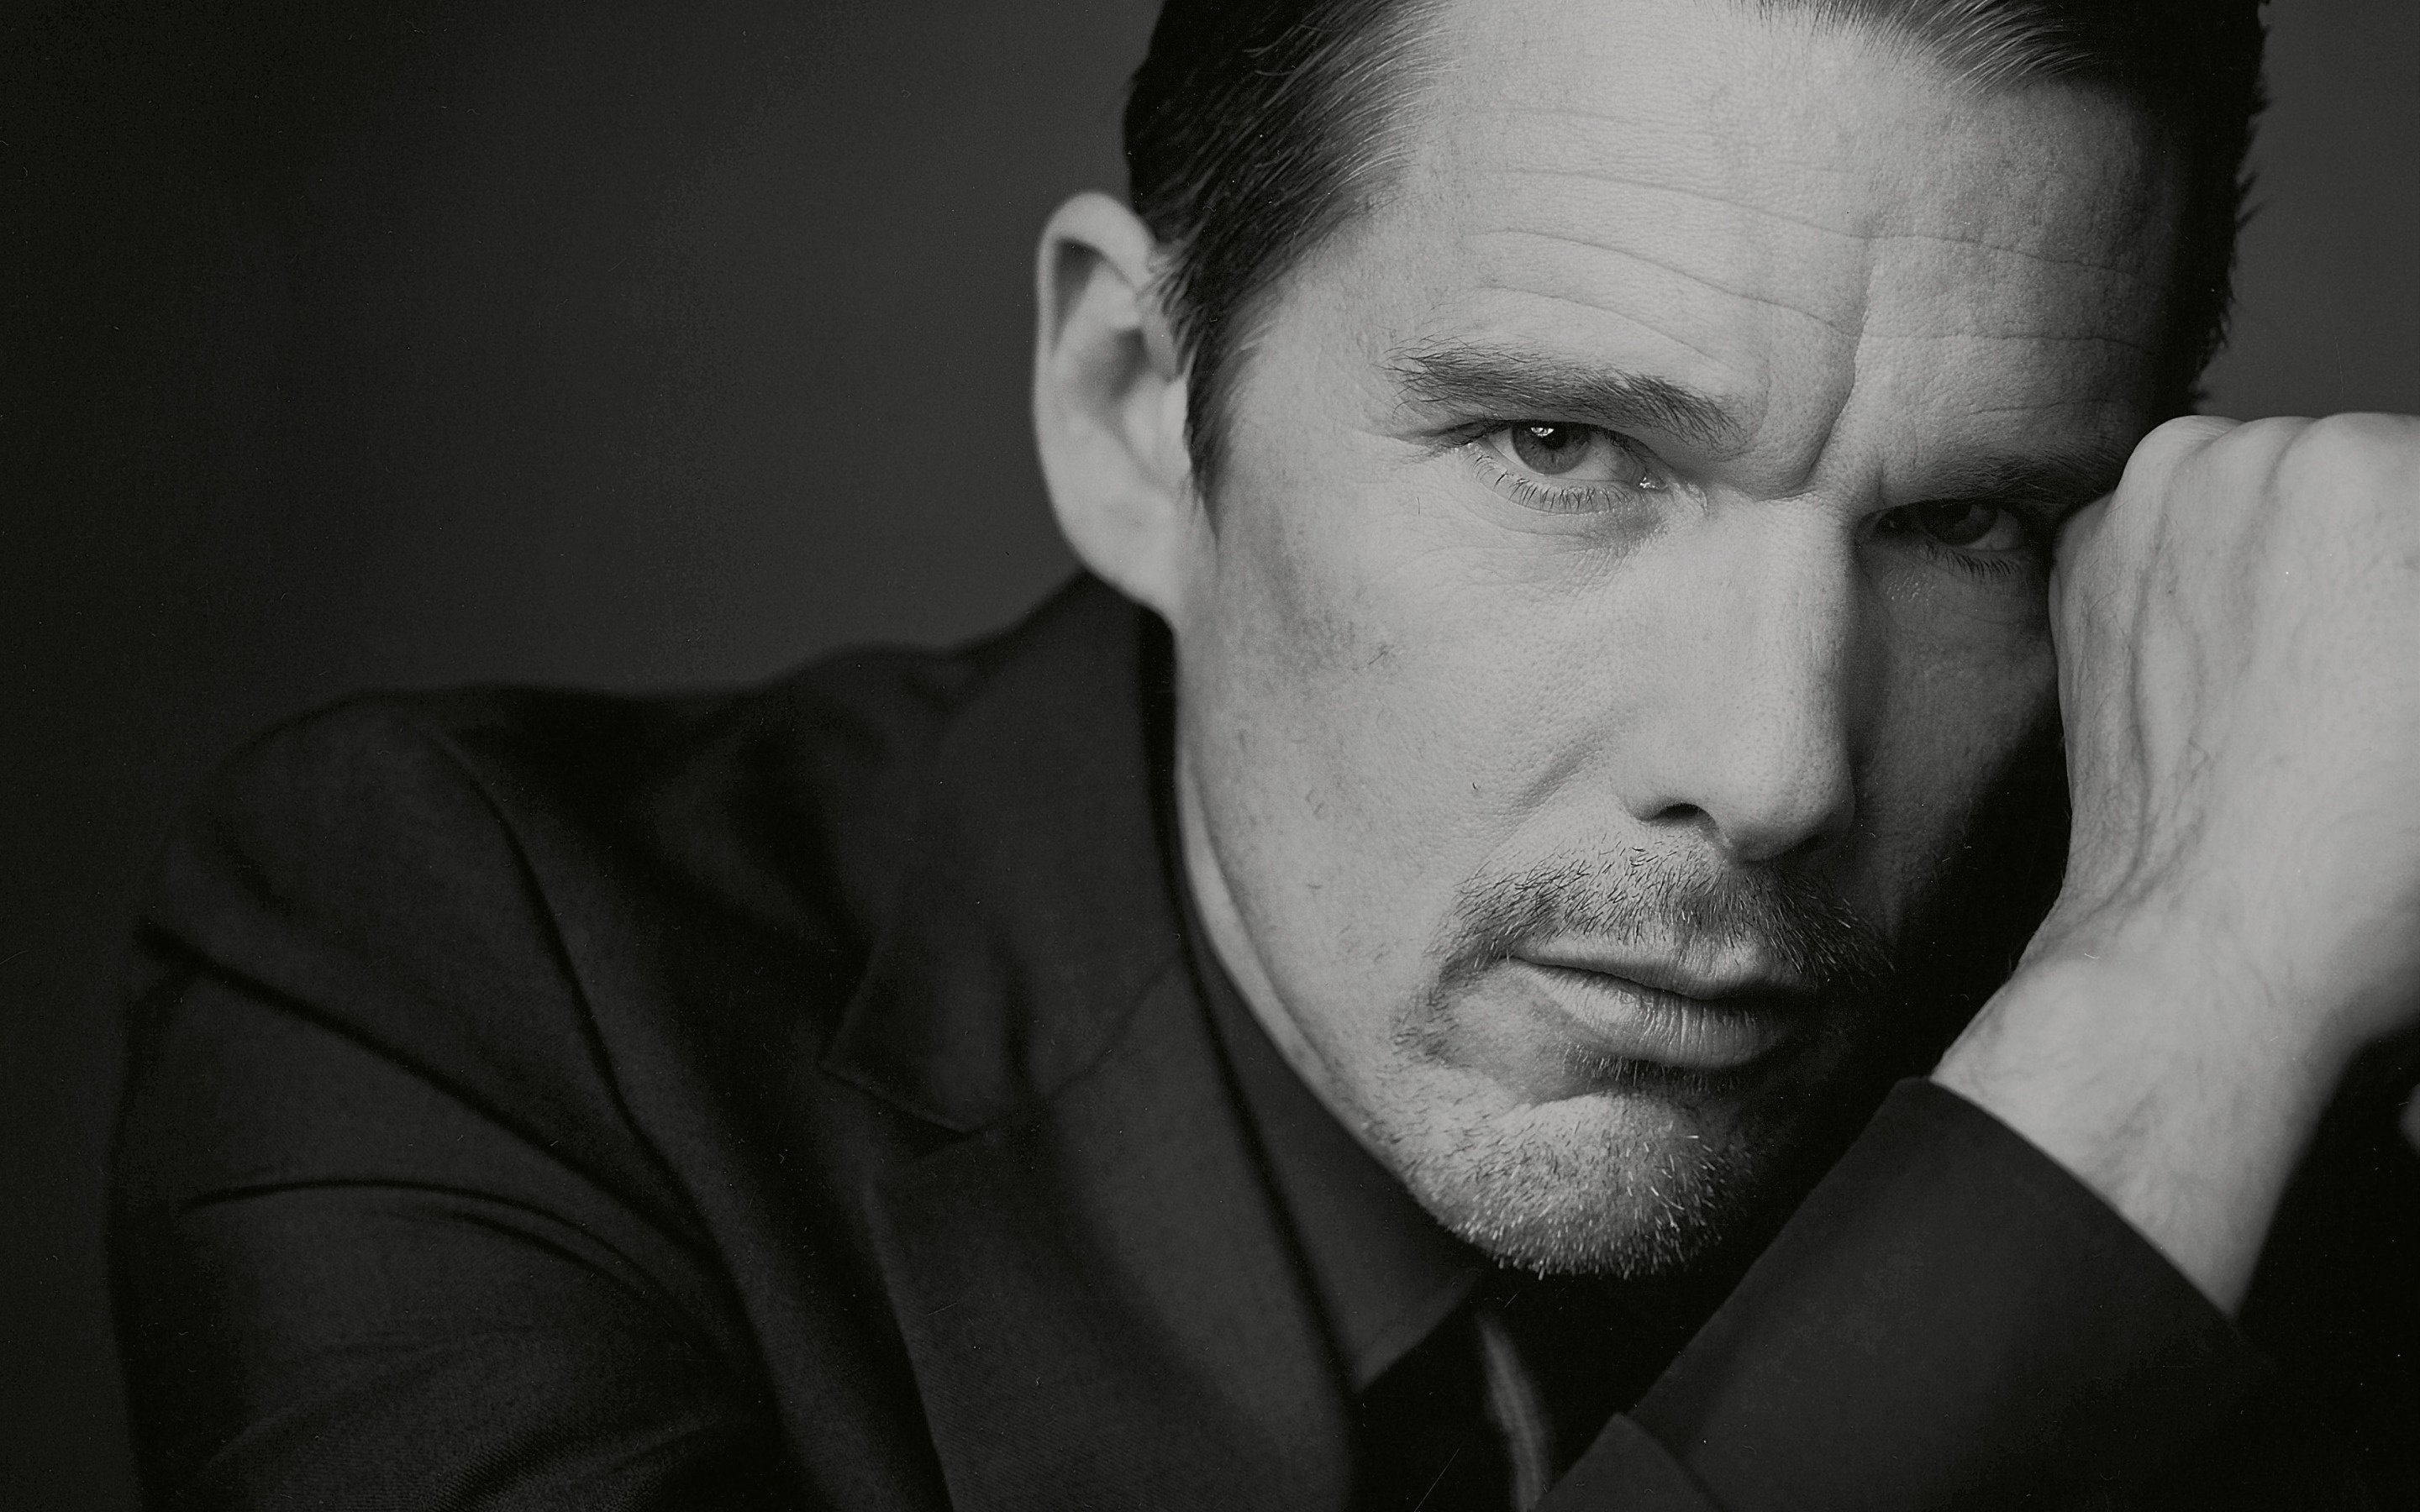 Ethan Hawke: Made his directorial debut in 2001 with his drama “Chelsea Walls”, Monochrome. 2880x1800 HD Wallpaper.